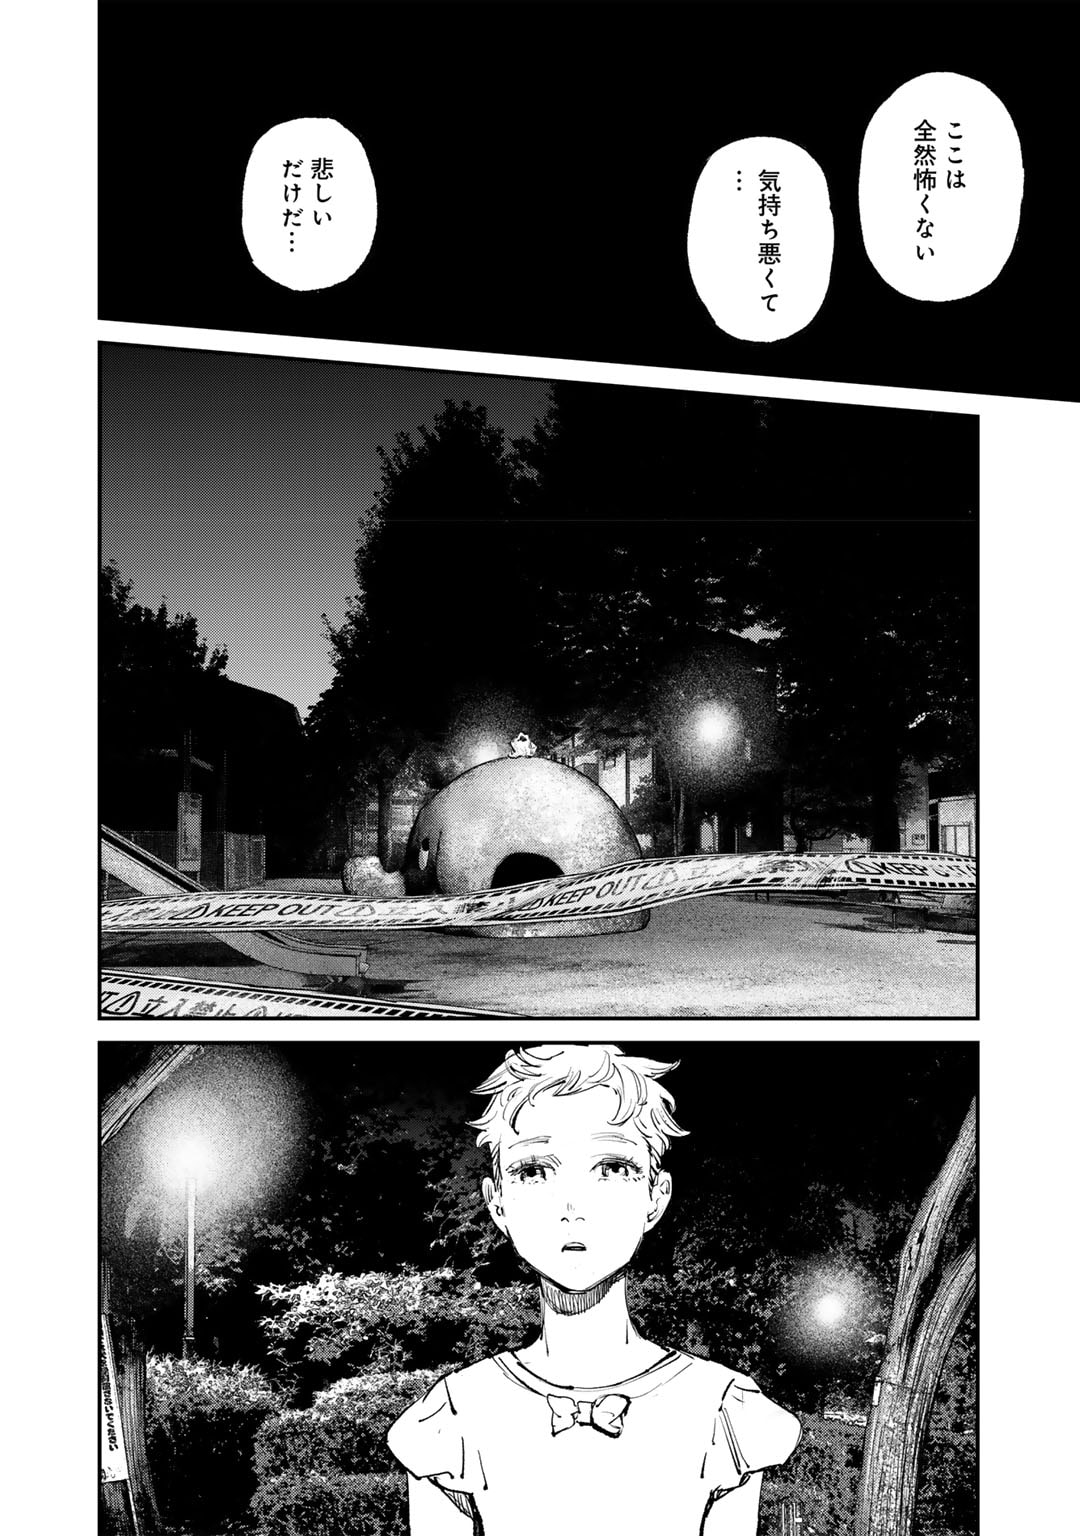 Kanata Is Into More Darker - Chapter 2 - Page 28